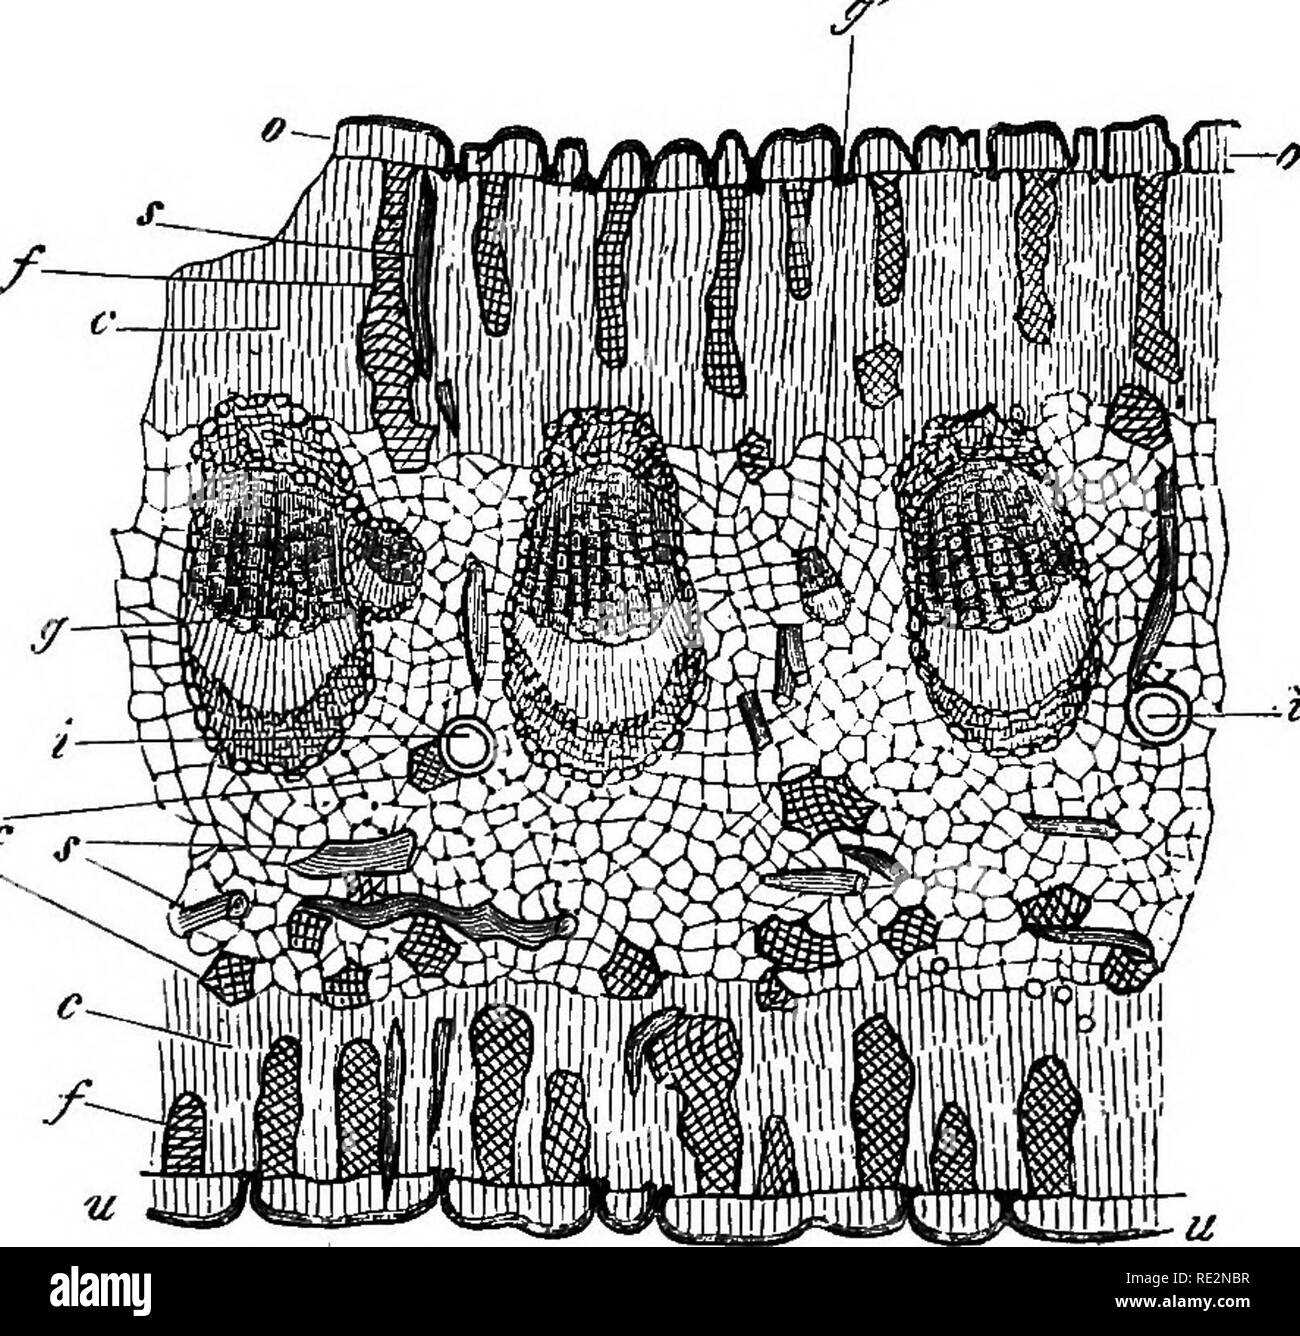 . Comparative anatomy of the vegetative organs of the phanerogams and ferns;. Plant anatomy; Ferns. ^oS PRIMARF ARRANGEMENT OF TISSUES. are succulent and leathery, a middle layer is present, similar to the entire organ in form, which fills up the internal space, and is enclosed by the chlorophyll- parenchyma as by a cortex; in many species of Aloe (A. tesselata, cuspidata, .atrovirens, &amp;c.) it breaks through the latter, as it were, in places, so as to reach the epidermis ^ It consists, as a rule, of relatively large, colourless cells, destitute of chlorophyll, which essentially contain wat Stock Photo